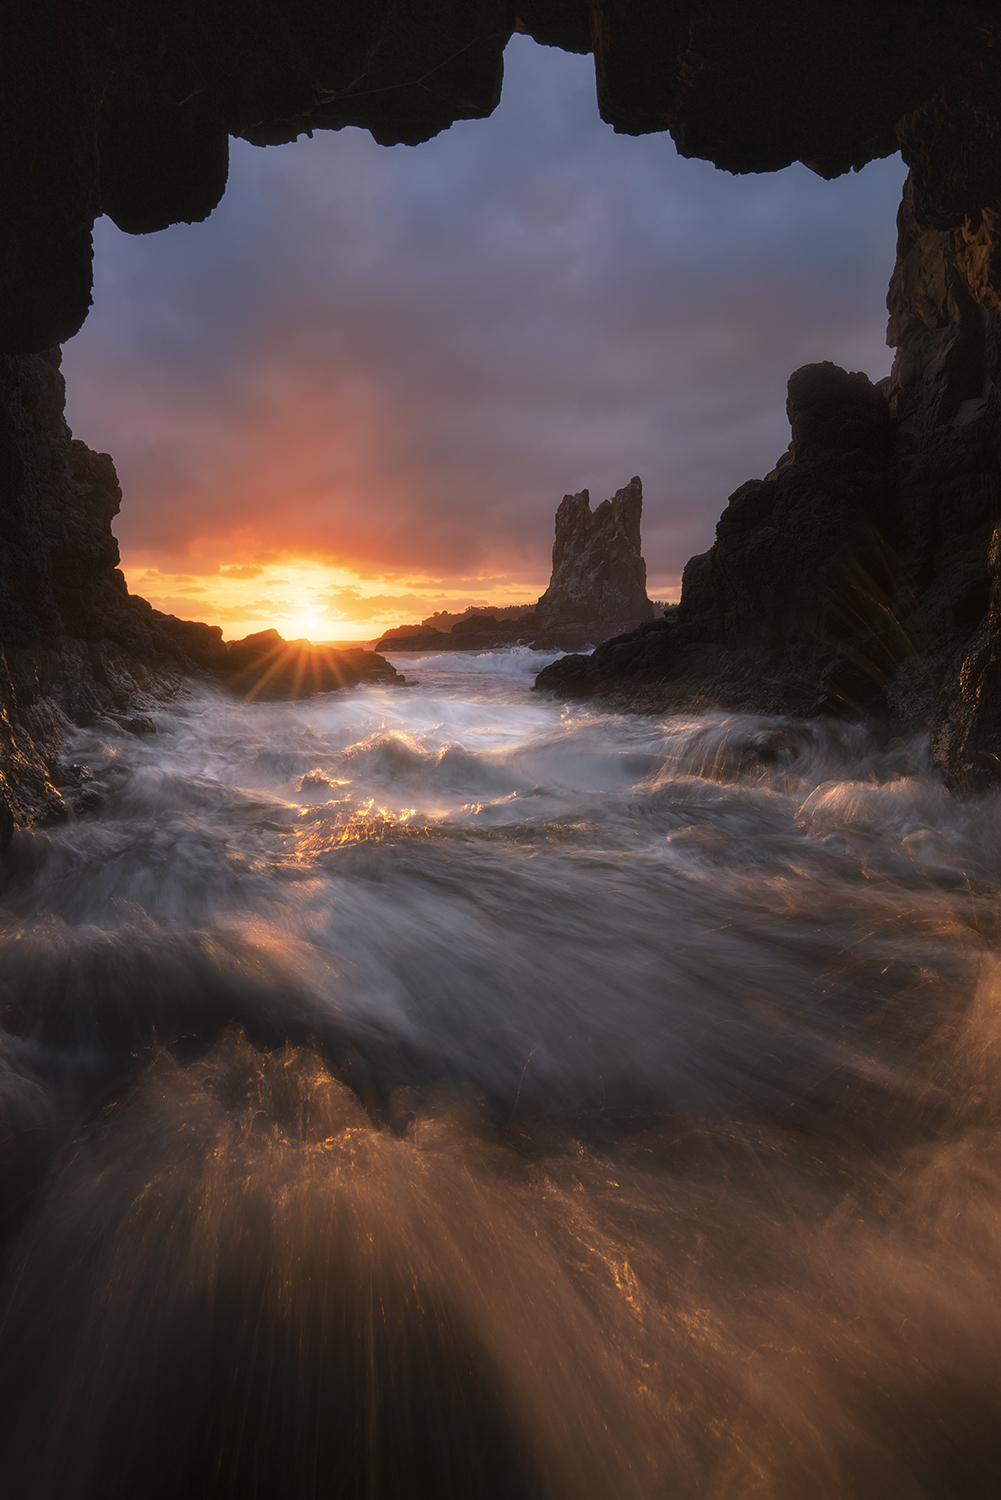 Water rushing inside a sea cave at sunrise